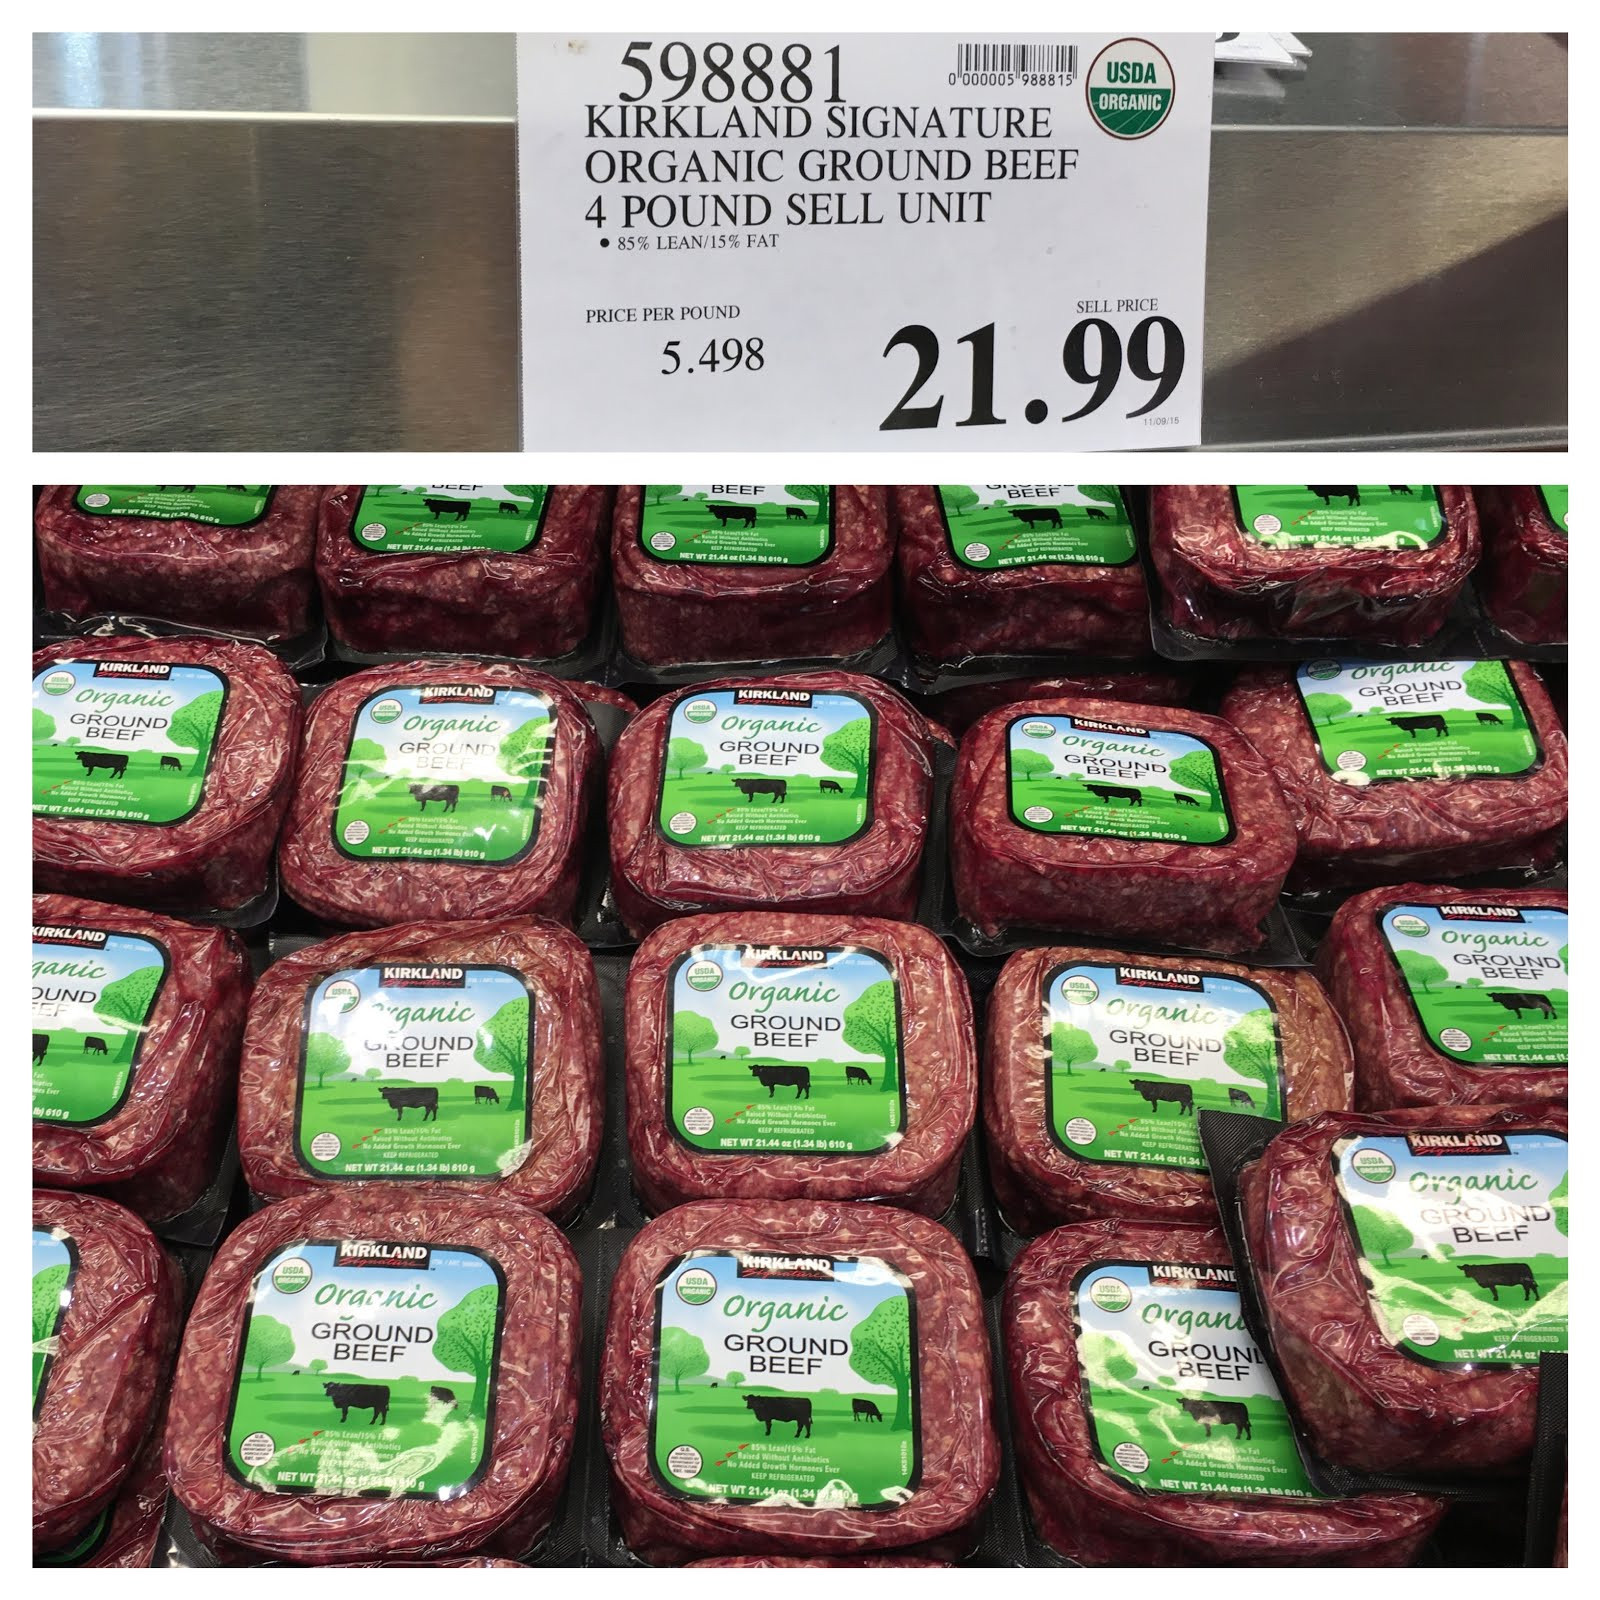 Costco Organic Ground Beef
 the Costco Connoisseur Survive your Whole30 with Costco